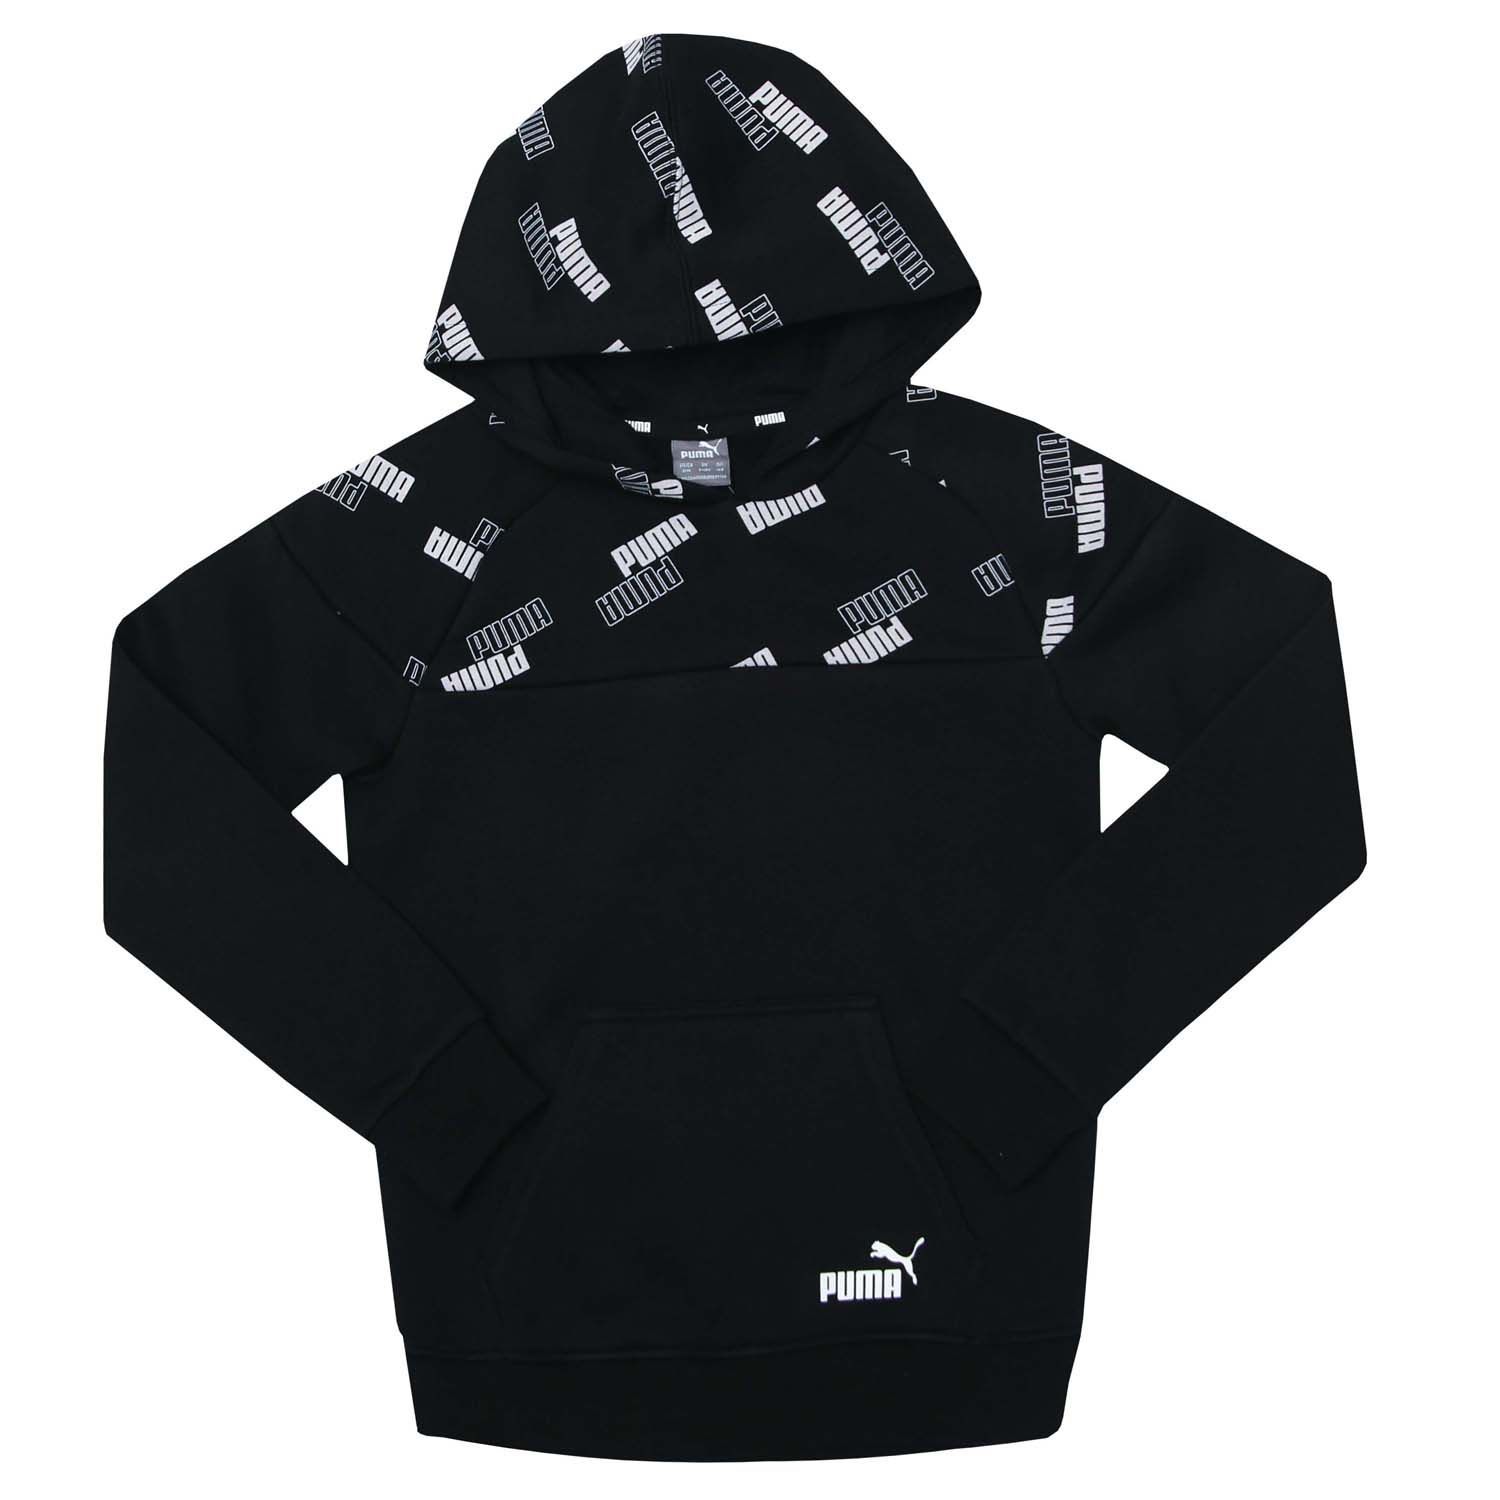 Junior Boys Puma Power Print Hoody in black.- Drawcord-adjustable hood.- Long sleeves with ribbed cuffs.- Large pouch pocket- Ribbed hem.- Distinctive logos.- Comfortable loose fit.- 67% Cotton  33% Polyester.  Machine washable. - Ref: 58930501E